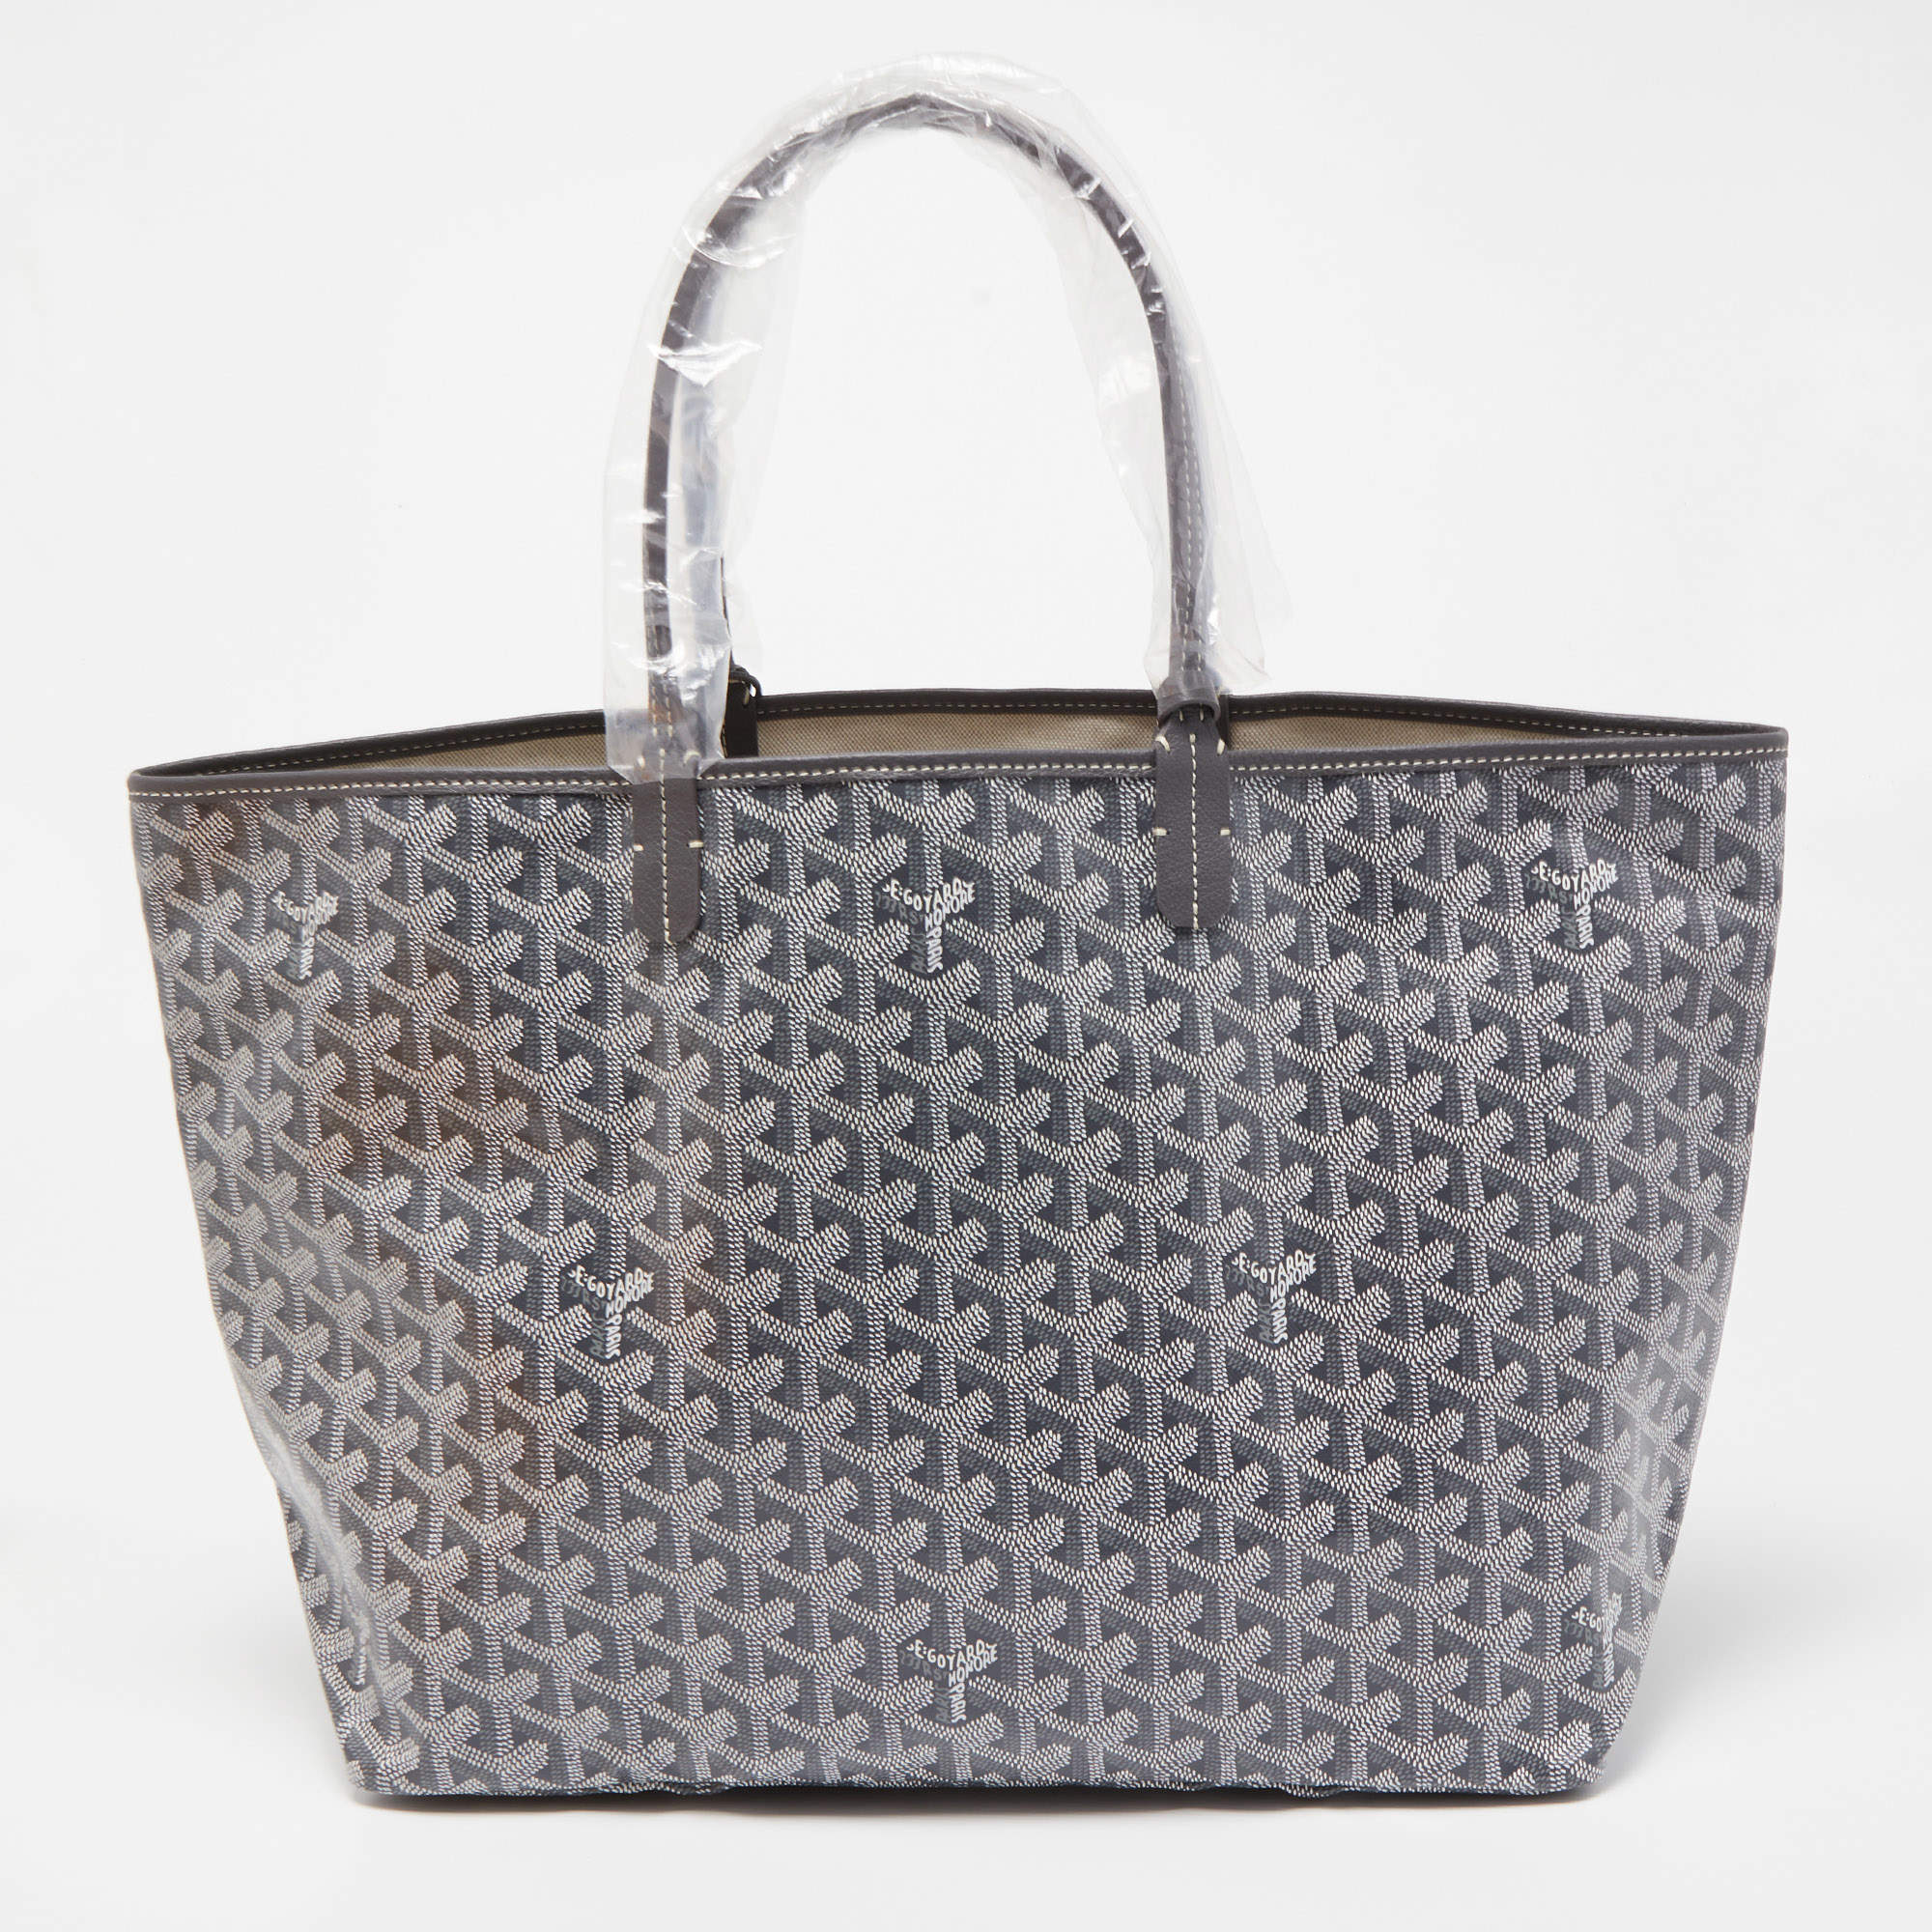 Goyard St. Louis Tote GM Black with Tan Trim, New with Dustbag